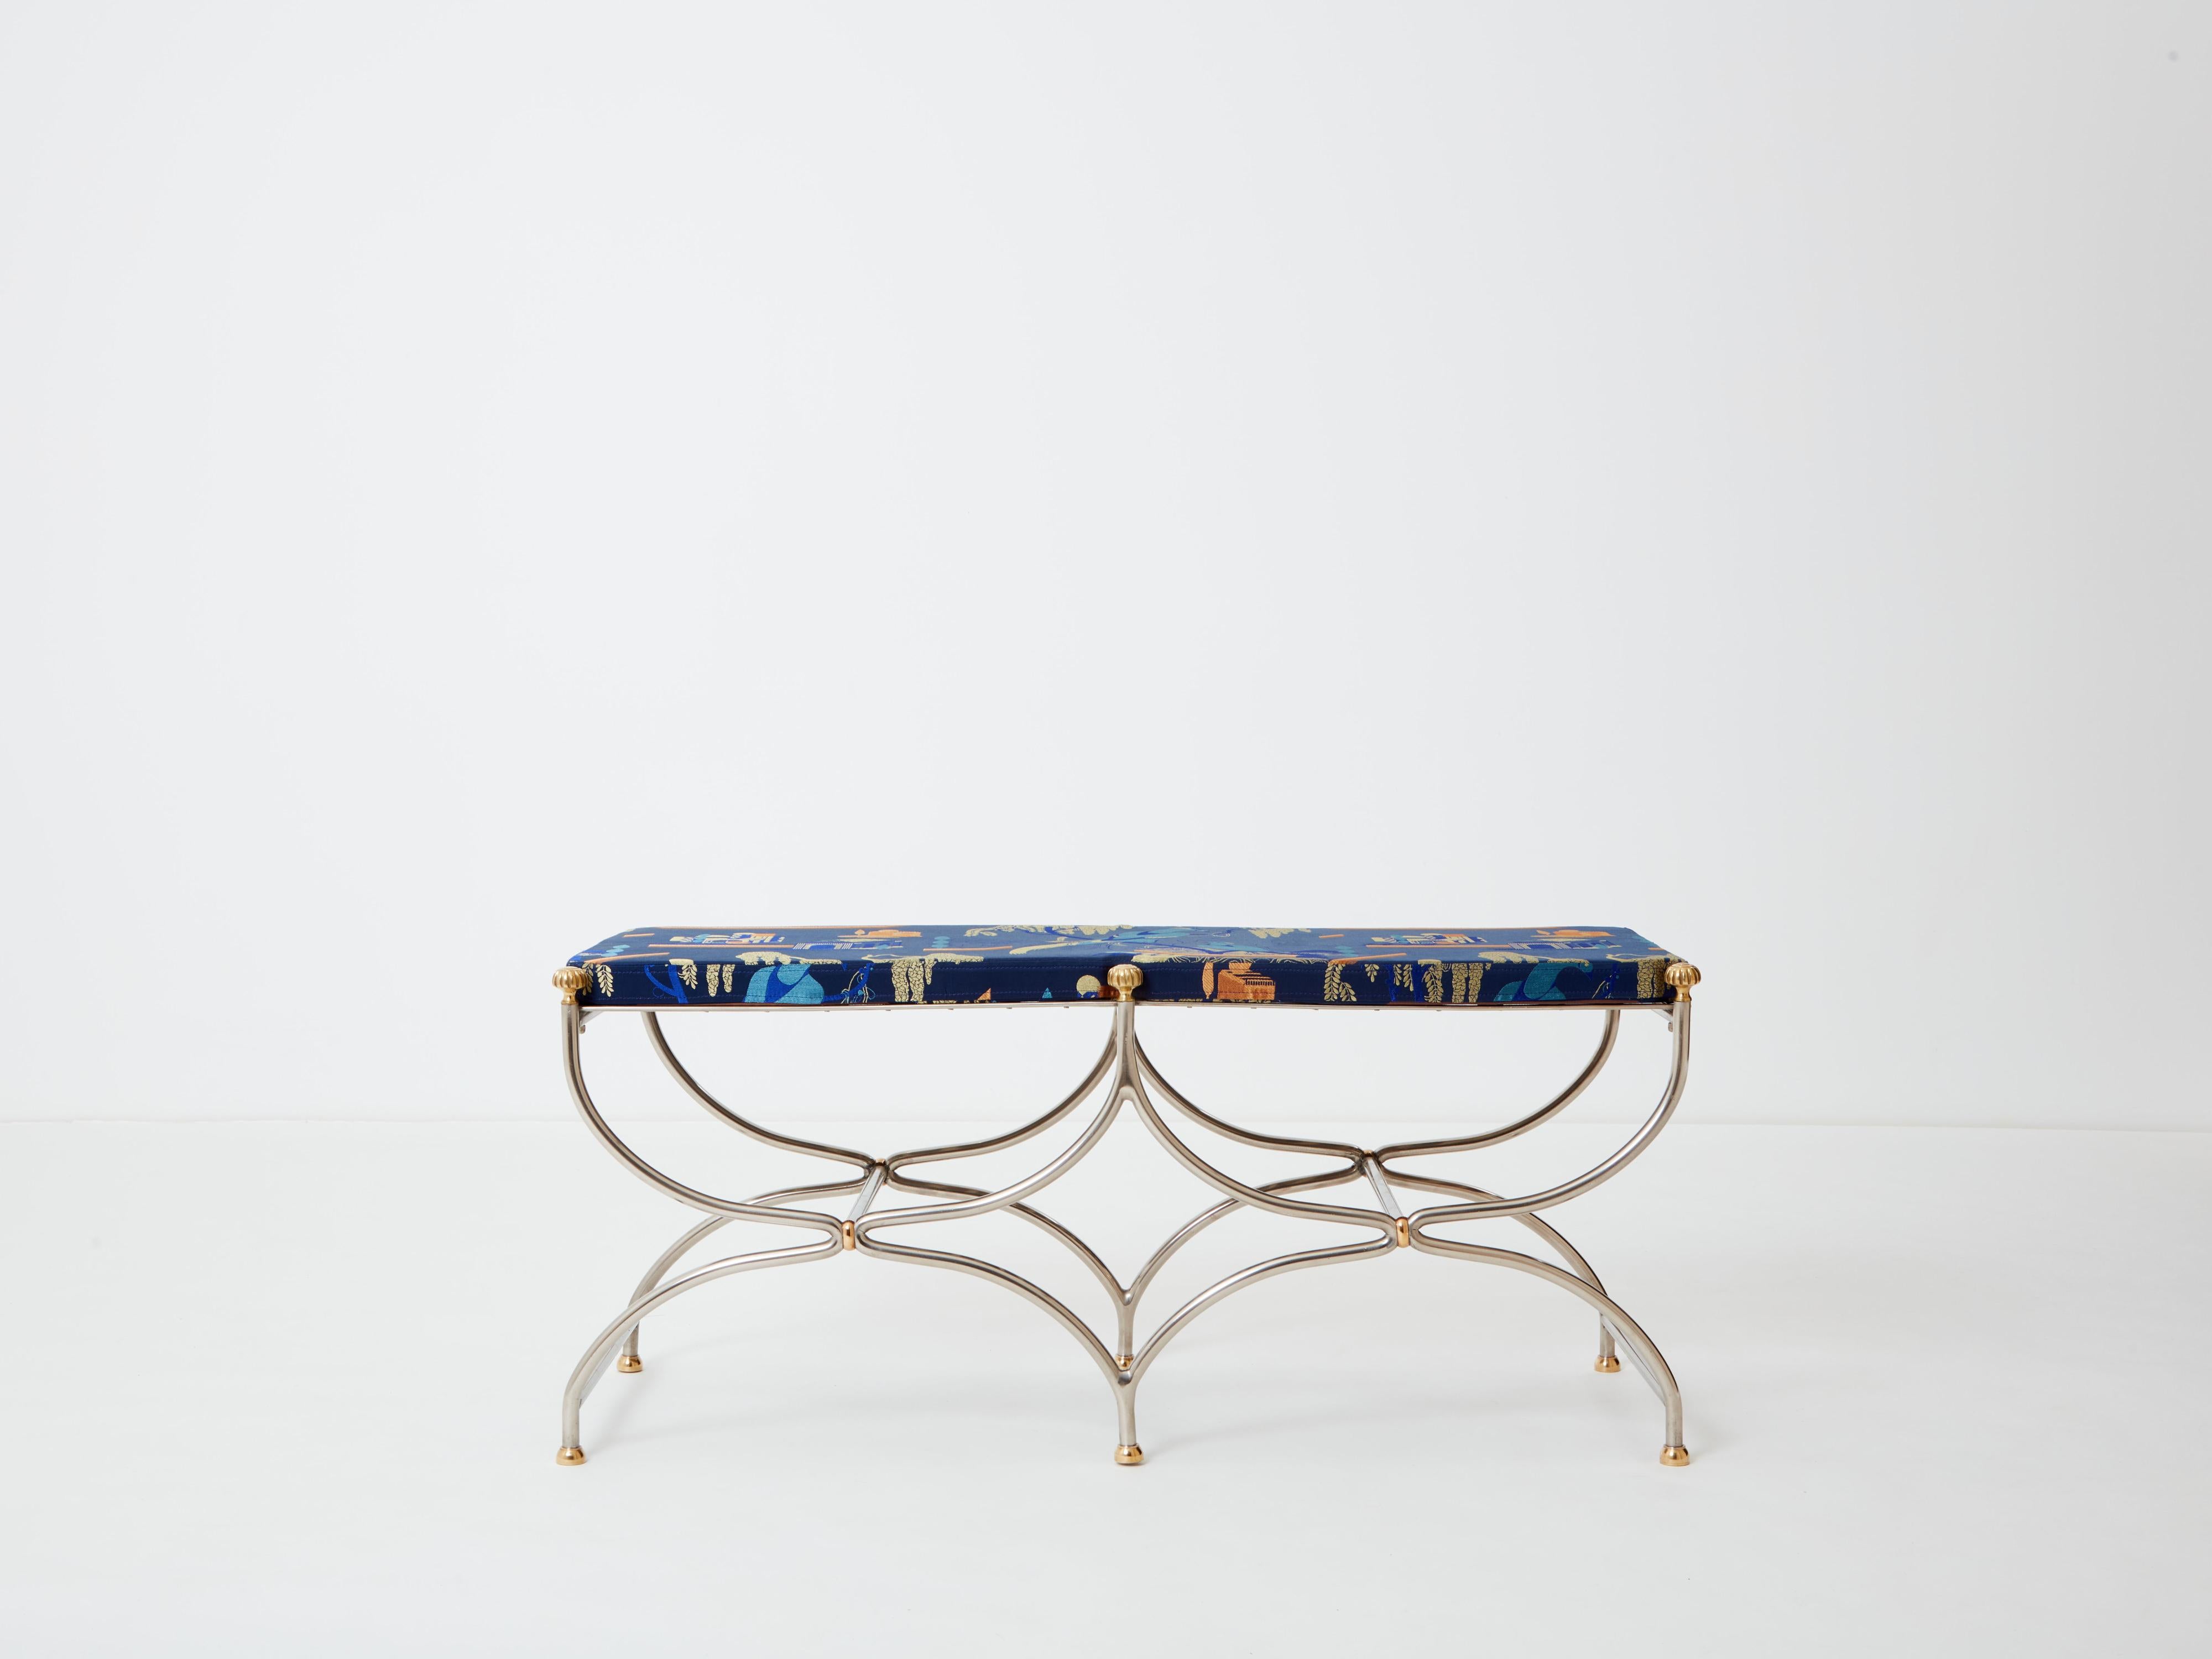 Mid-20th Century Neoclassical steel brass curule bench by Maison Jansen 1960s For Sale